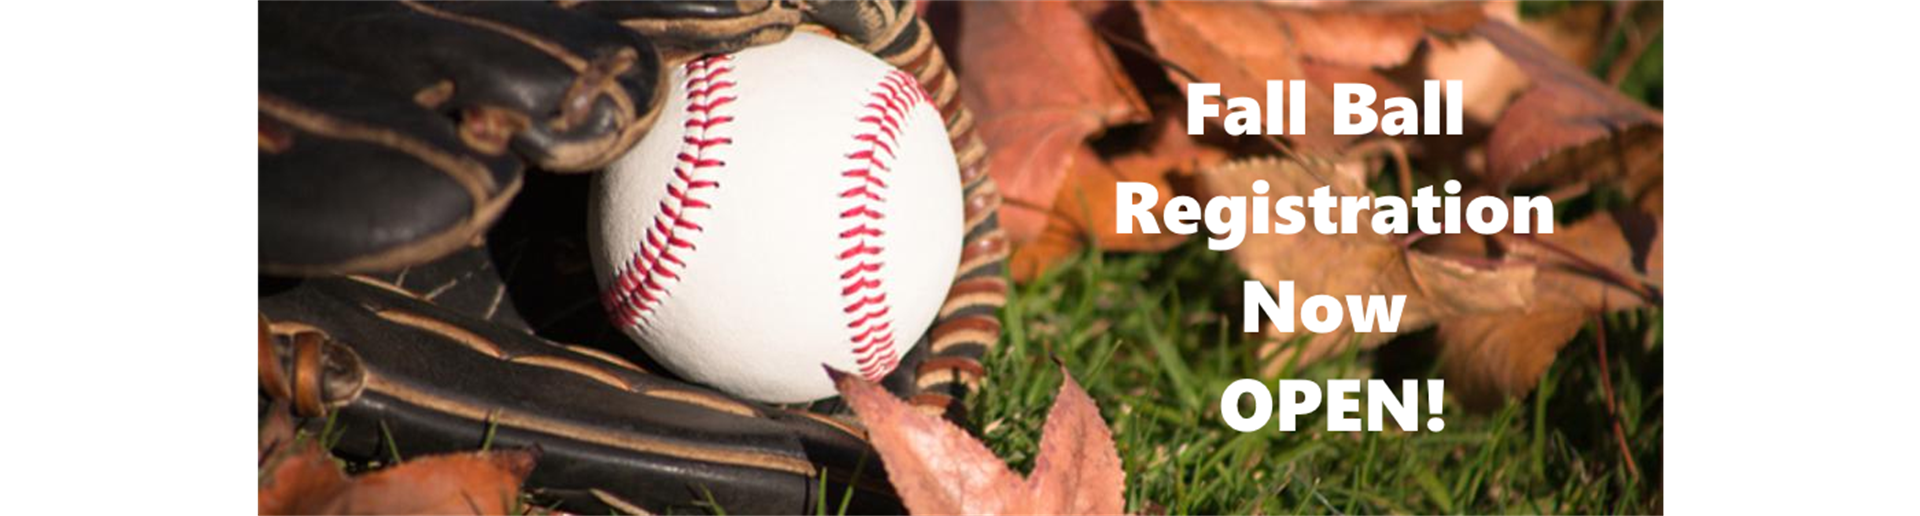 Fall Ball Registration Now Closed!